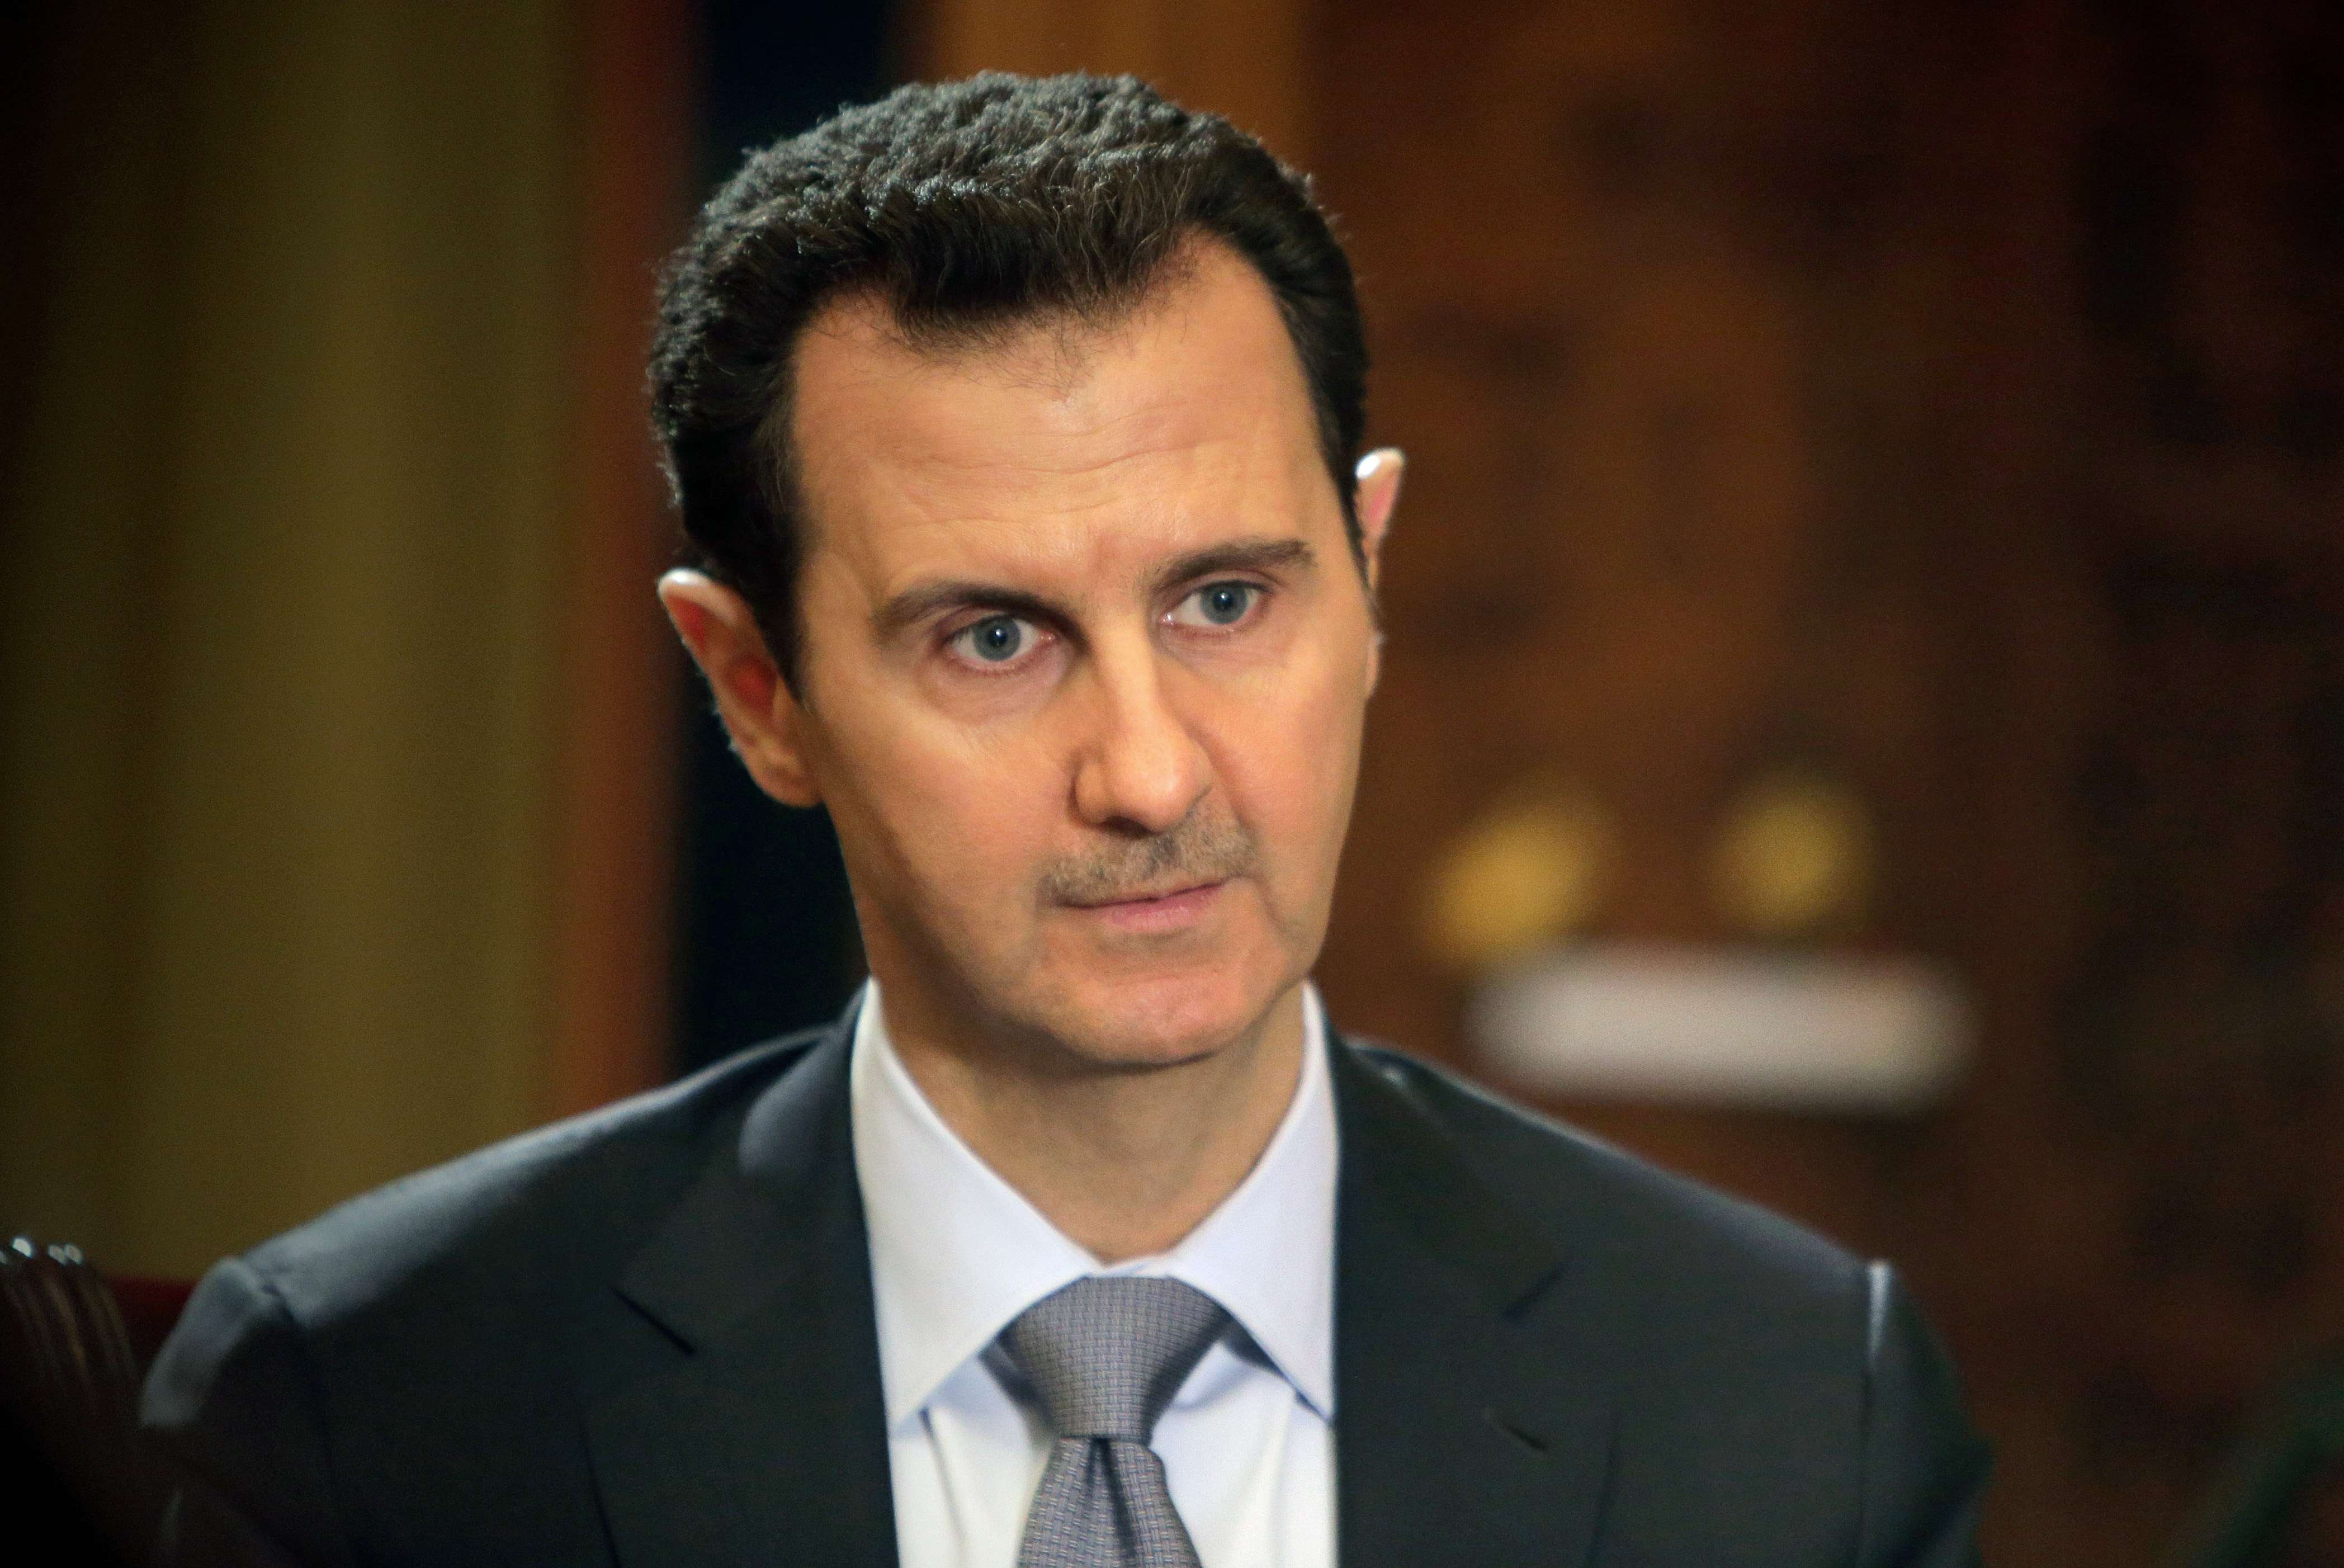 Syrian President Bashar al-Assad during an interview with AFP in at the presidential palace in Damascus, in a photo released on Jan. 20, 2014. (Joseph Eid / AFP / Getty Images)